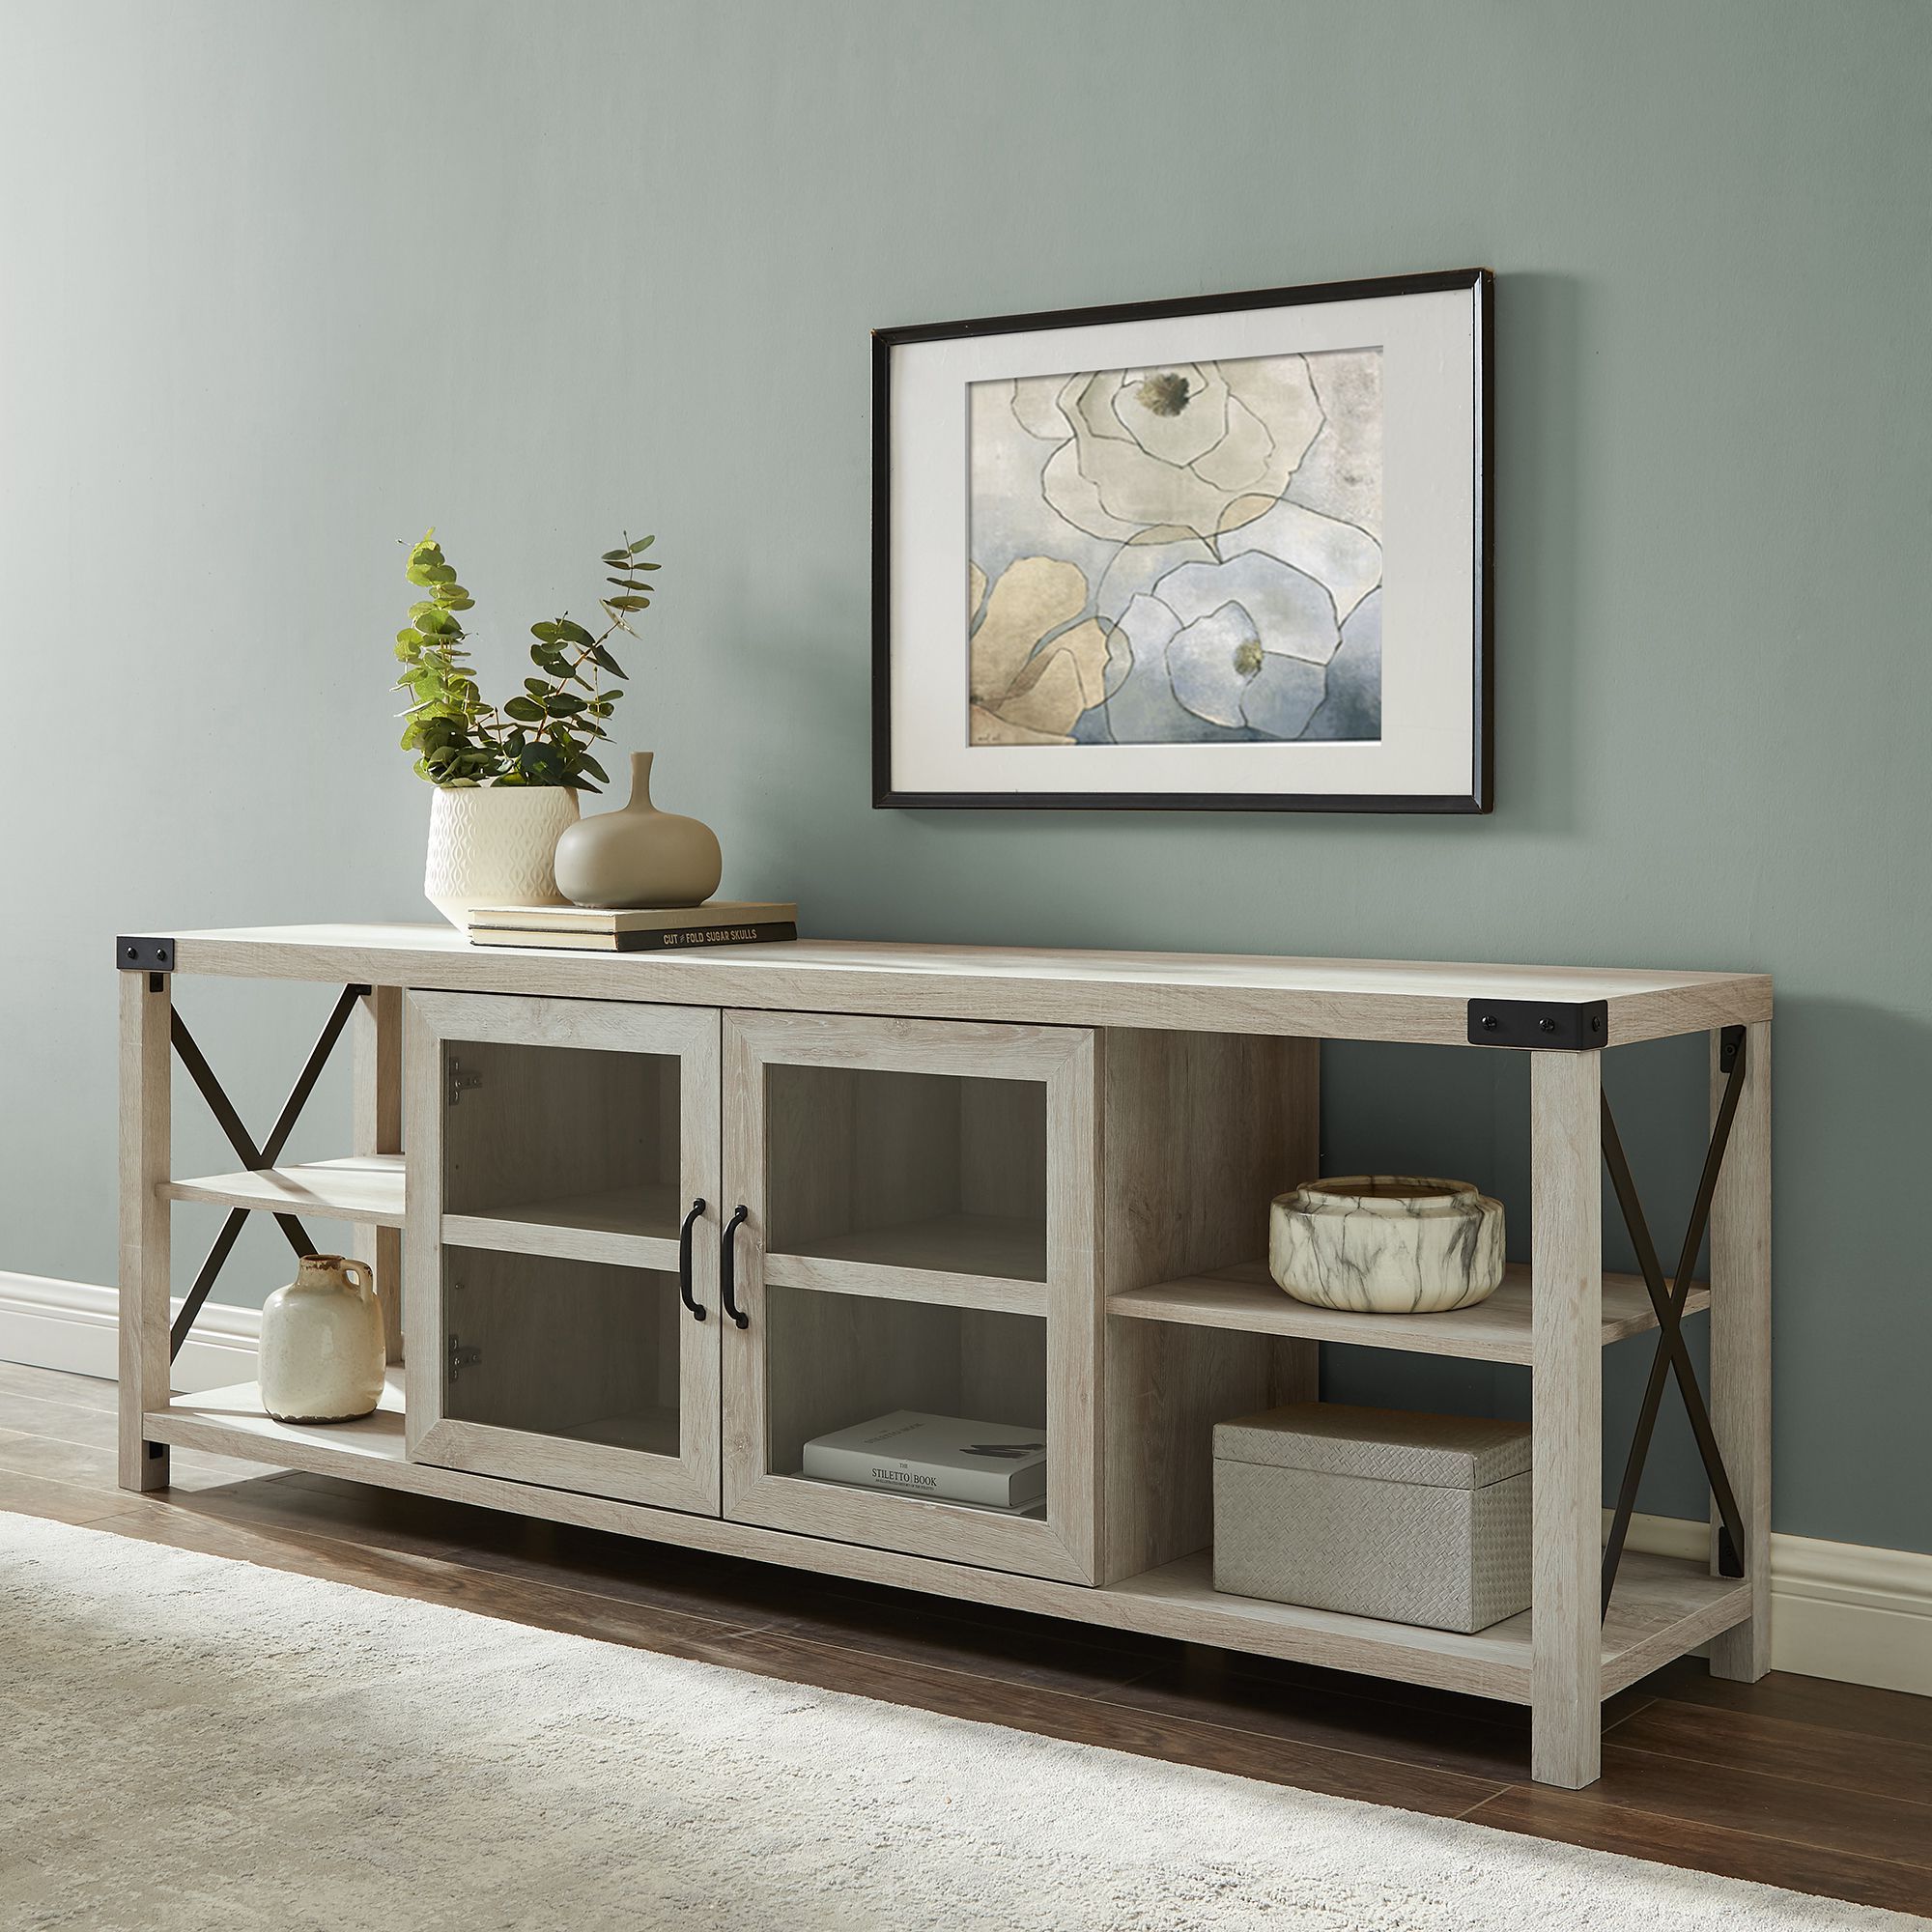 Free 2 Day Shipping. Buy Magnolia 70" 2 Door White Oak Tv Pertaining To Mainor Tv Stands For Tvs Up To 70&quot; (Gallery 1 of 20)